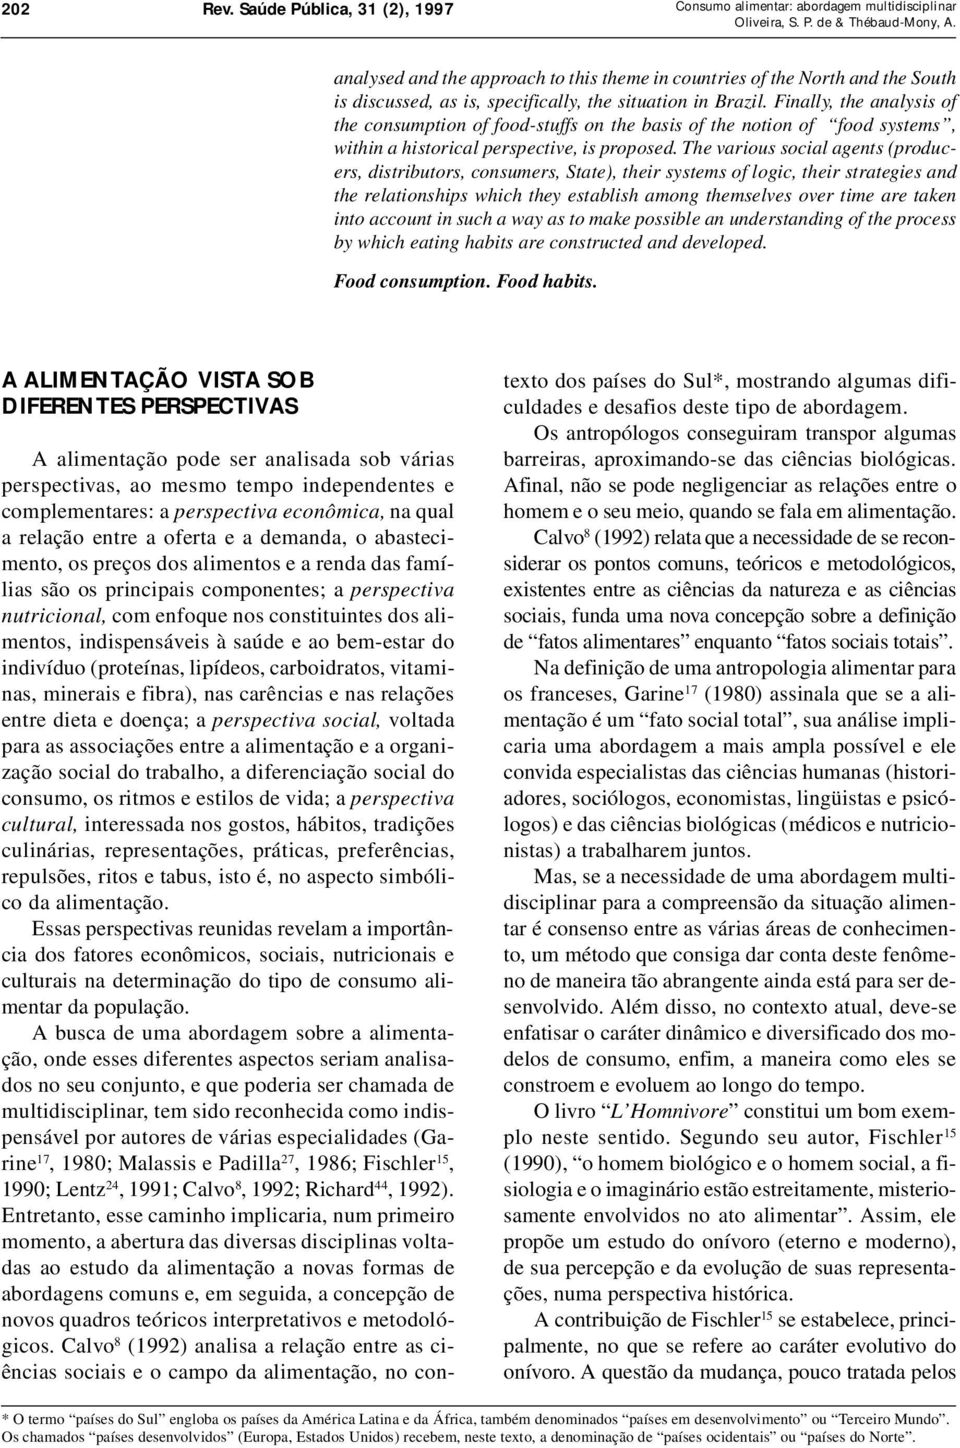 situation in Brazil. Finally, the analysis of the consumption of food-stuffs on the basis of the notion of food systems, within a historical perspective, is proposed.